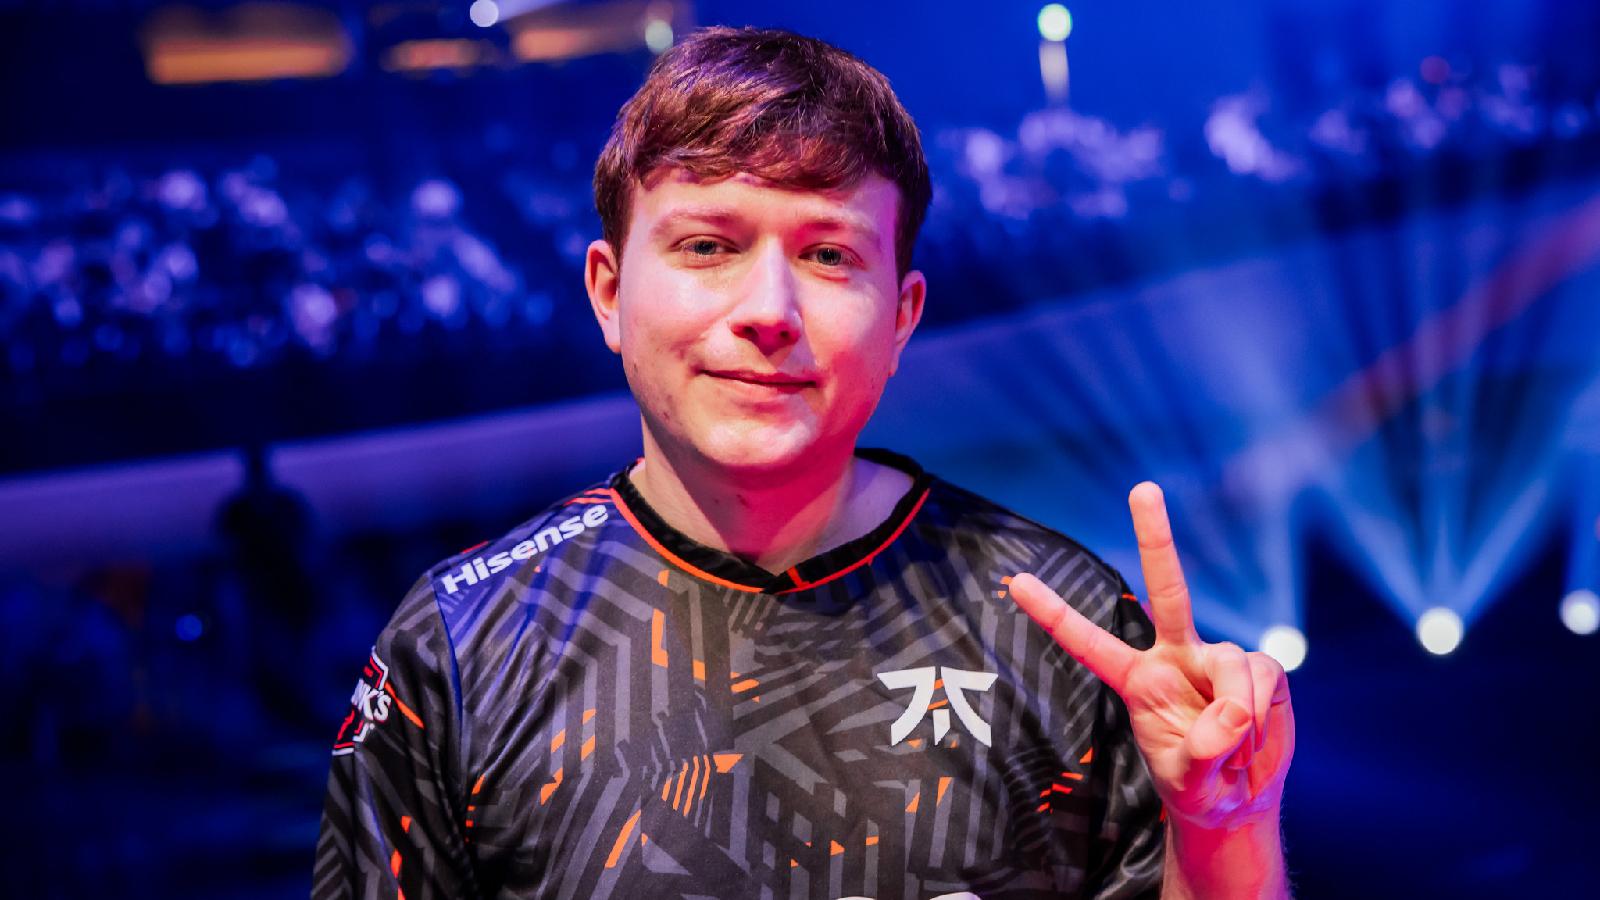 Fnatic Chronicle's stunning international streak comes to an end at  Valorant Champions 2023 - Dexerto